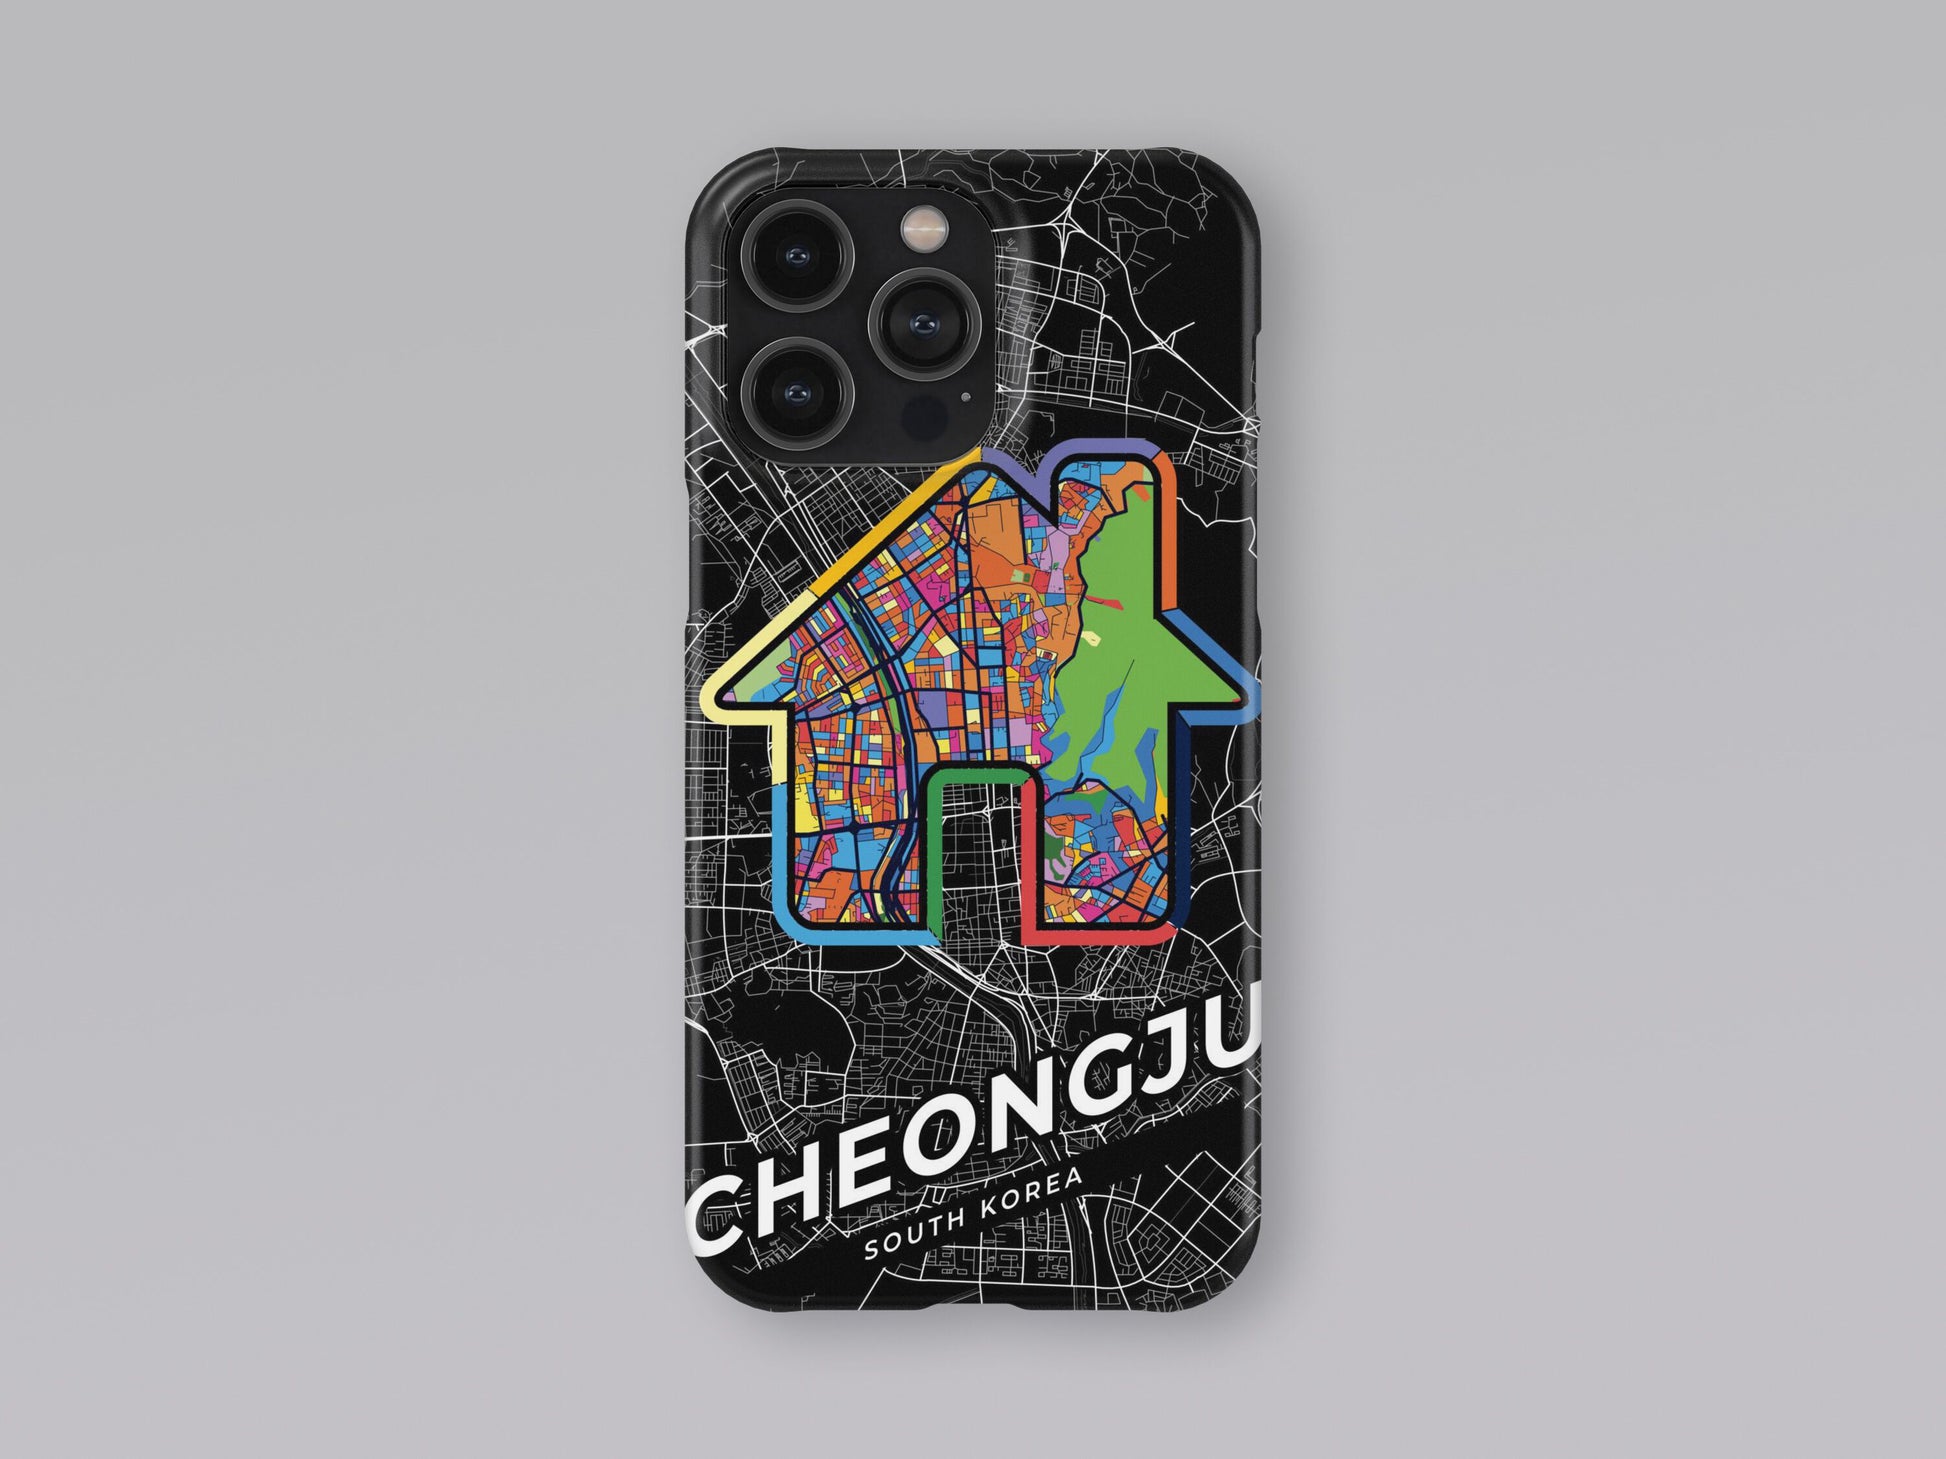 Cheongju South Korea slim phone case with colorful icon. Birthday, wedding or housewarming gift. Couple match cases. 3